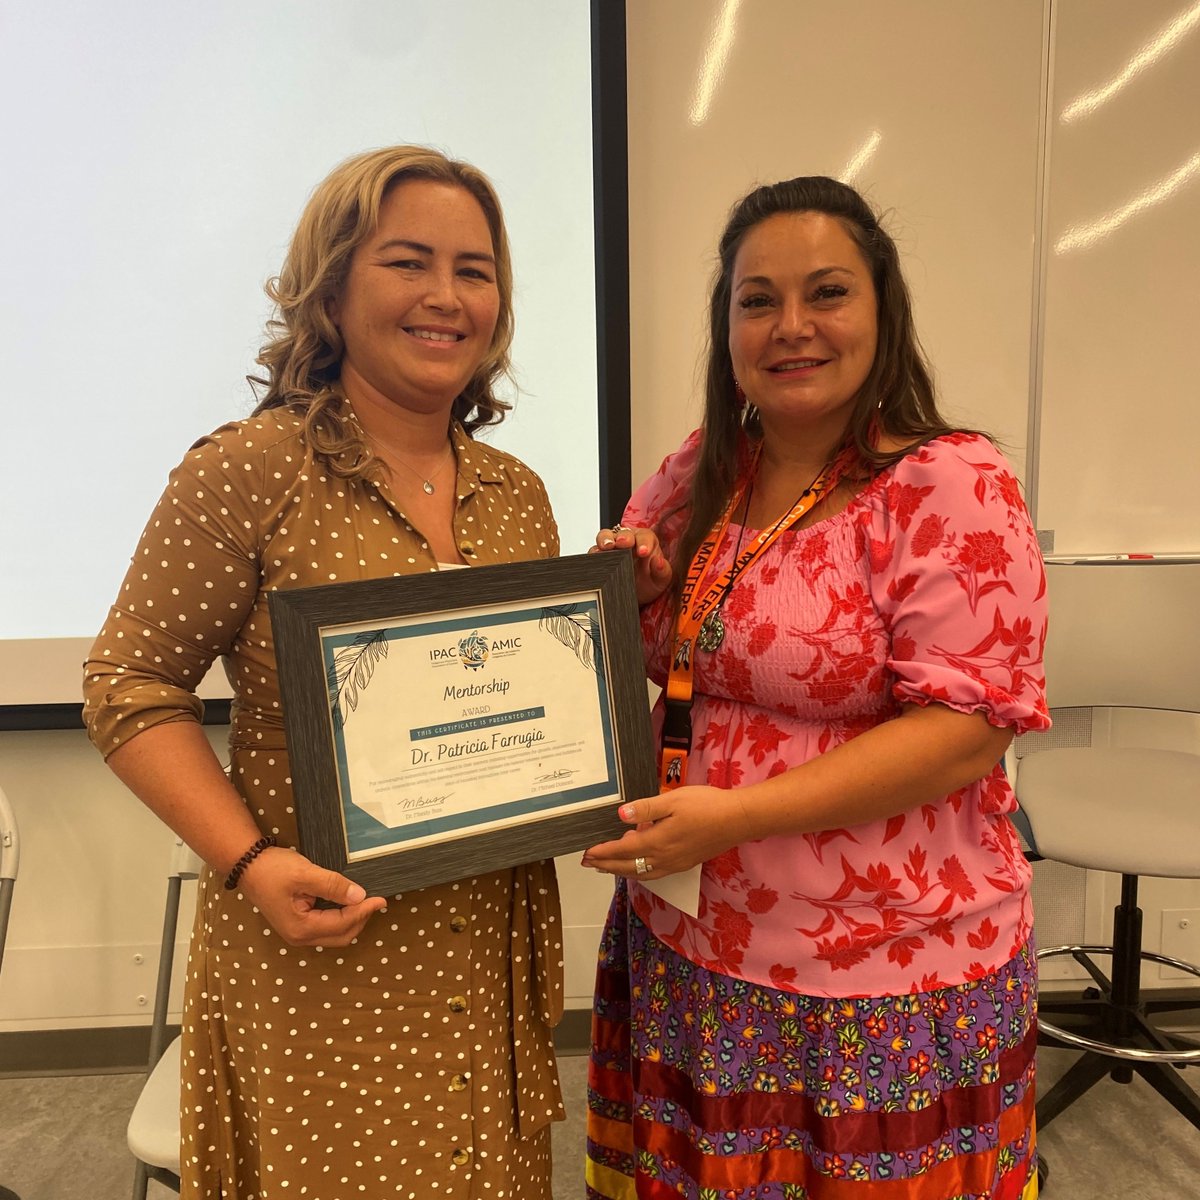 🏆 Dr. Patricia Farrugia receives the @IPACIndigenous Mentorship Award, recognizing her exceptional contributions to mentorship. She inspires authenticity, growth, and empowerment in her learners. Congratulations, Dr. Farrugia! #IPACMentorshipAward #IndigenousHealthcare